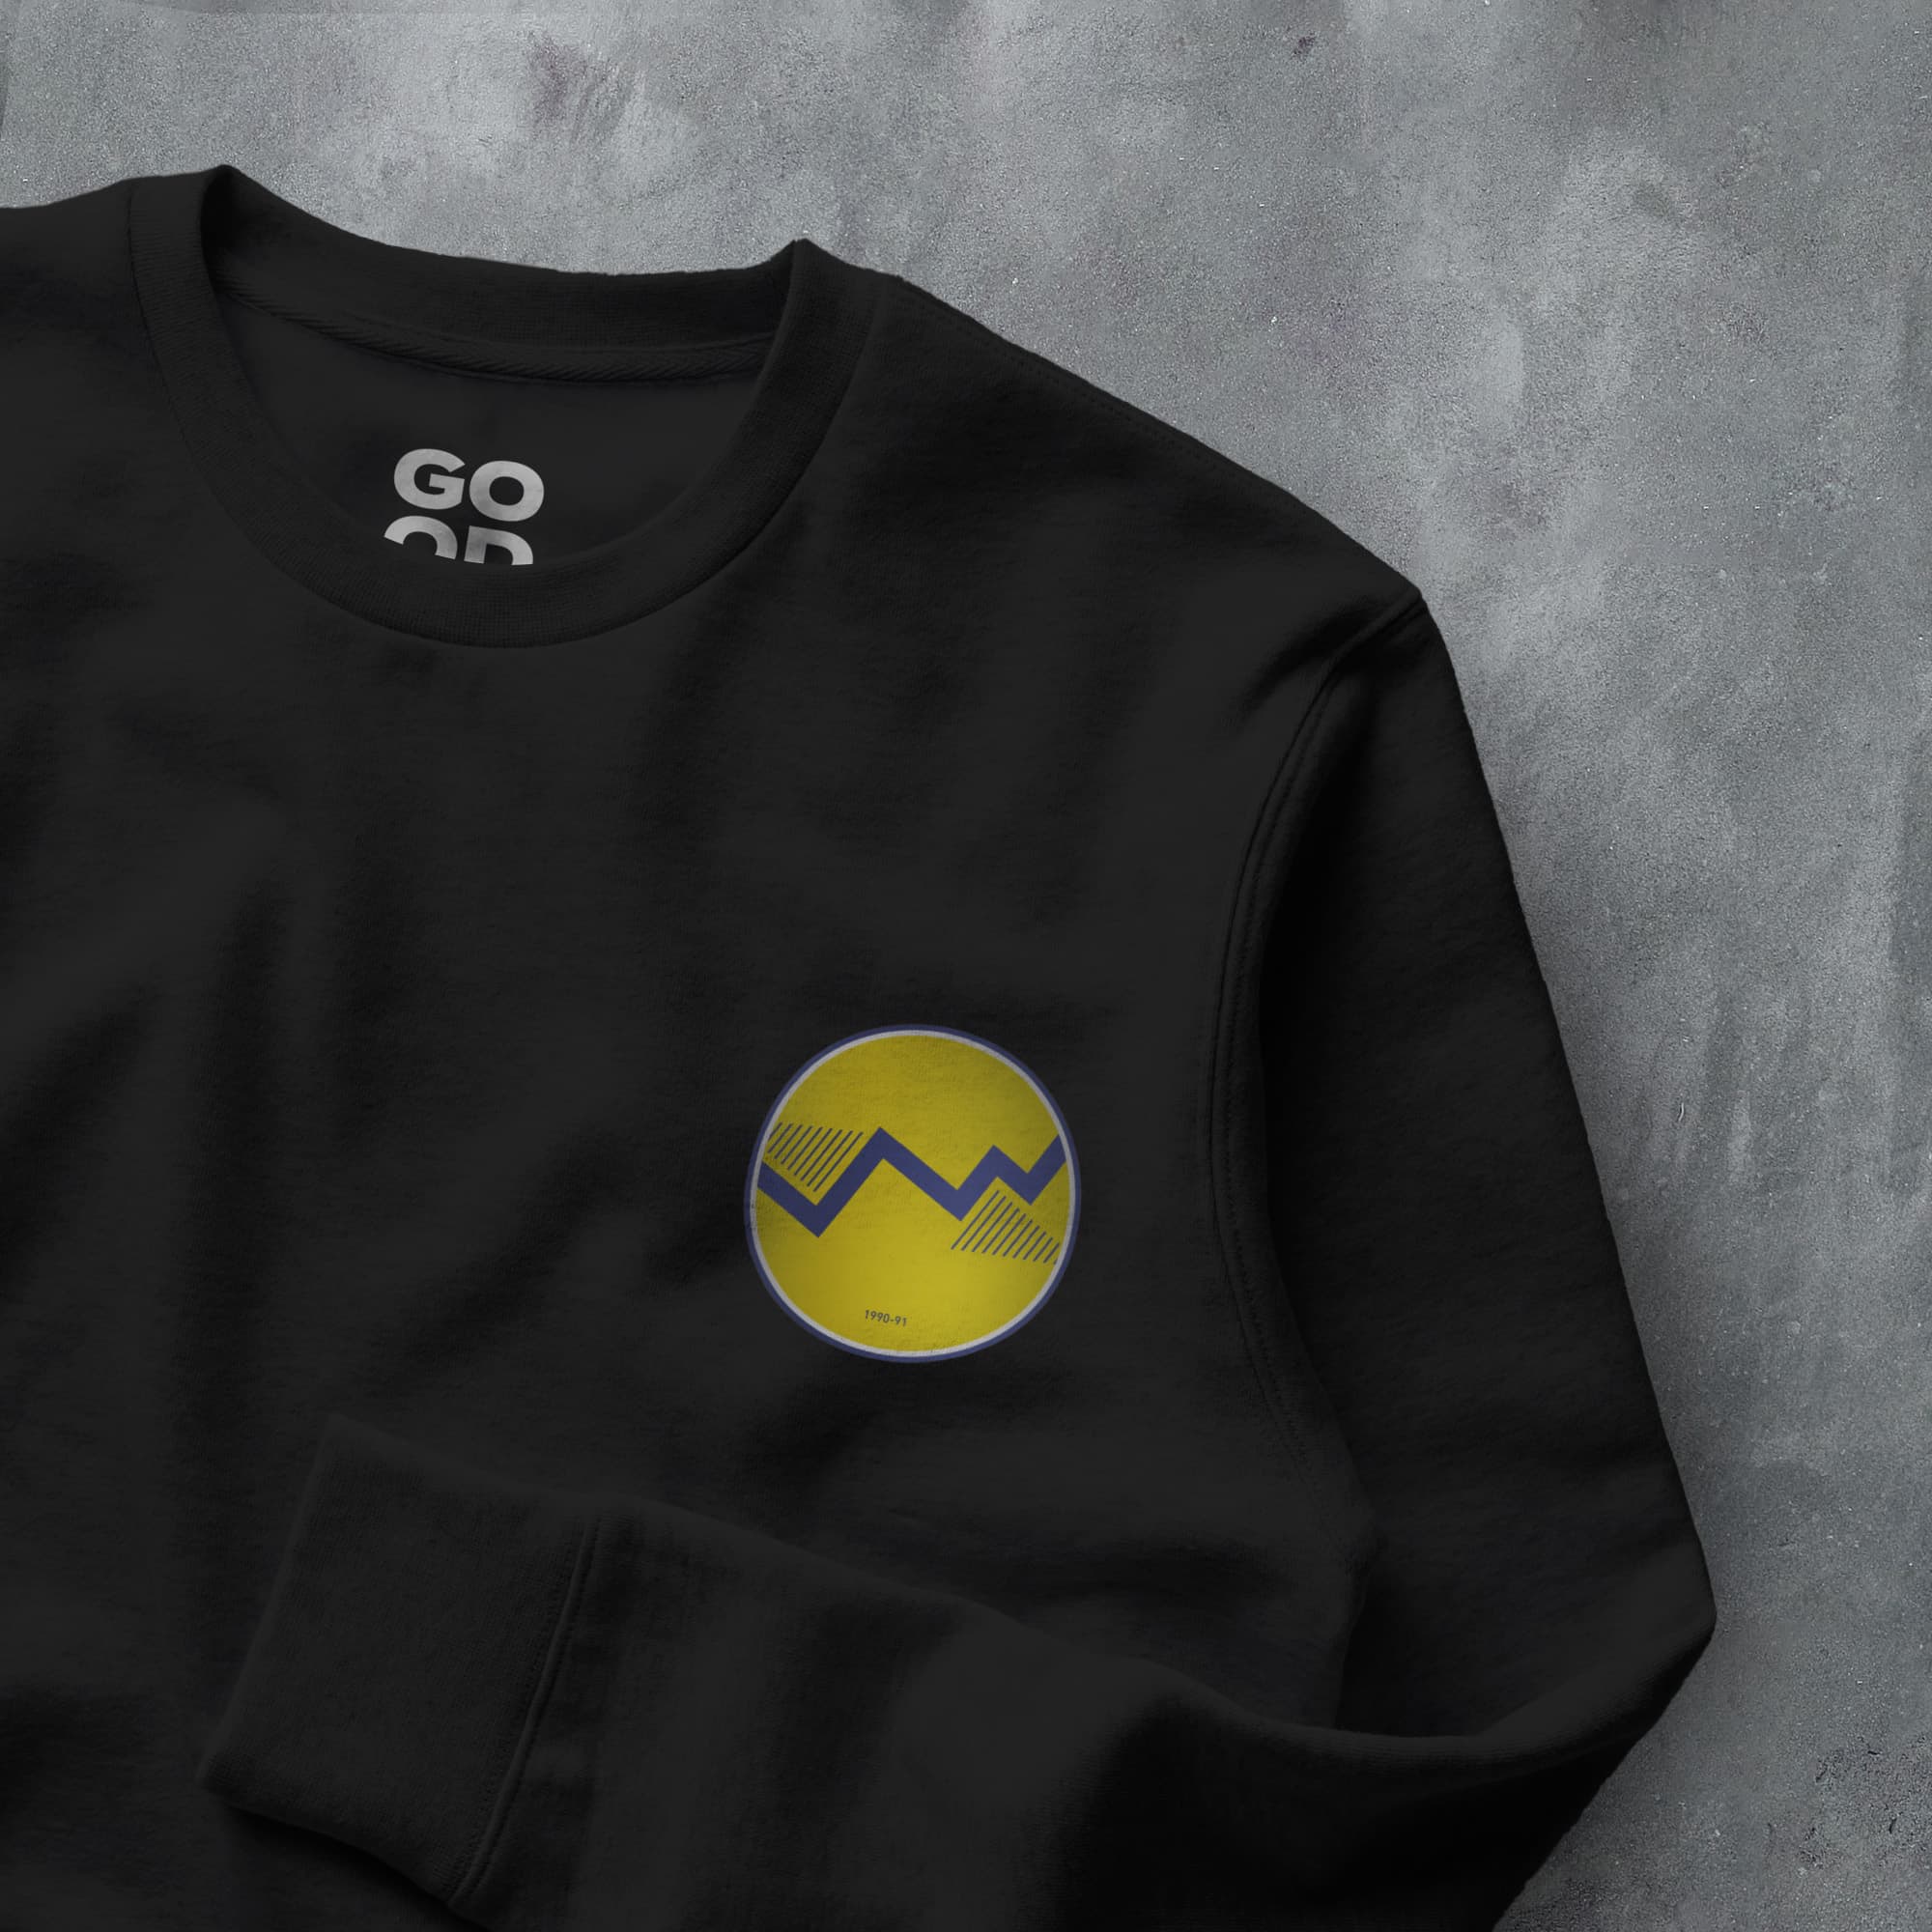 a black sweatshirt with a yellow smiley face on it